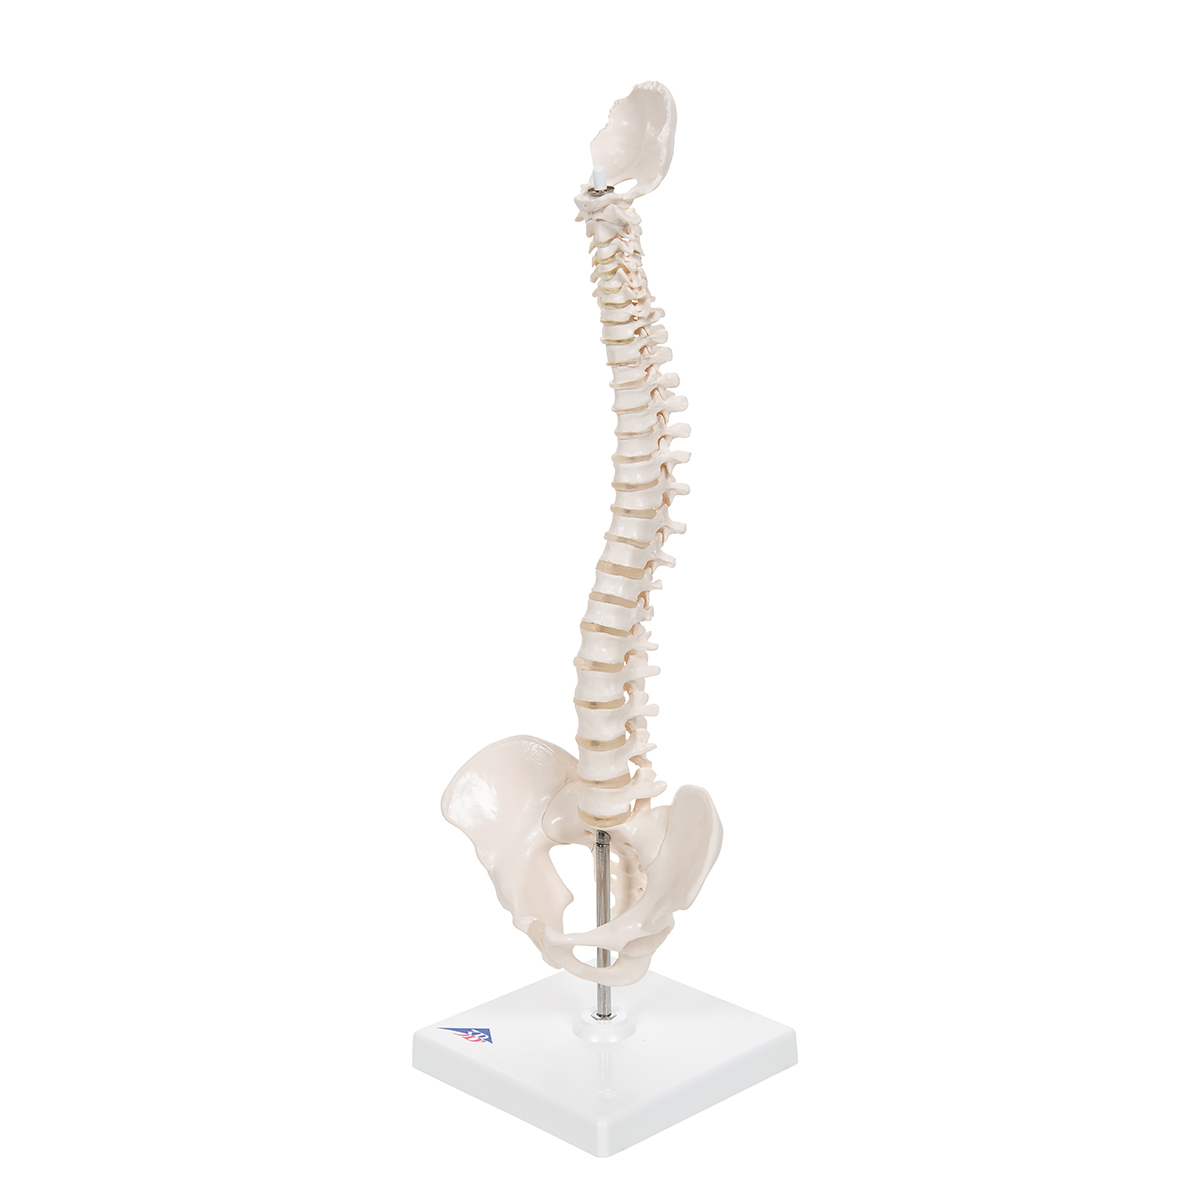 Modeling the Backbone and Spinal Cord – Perkins School for the Blind